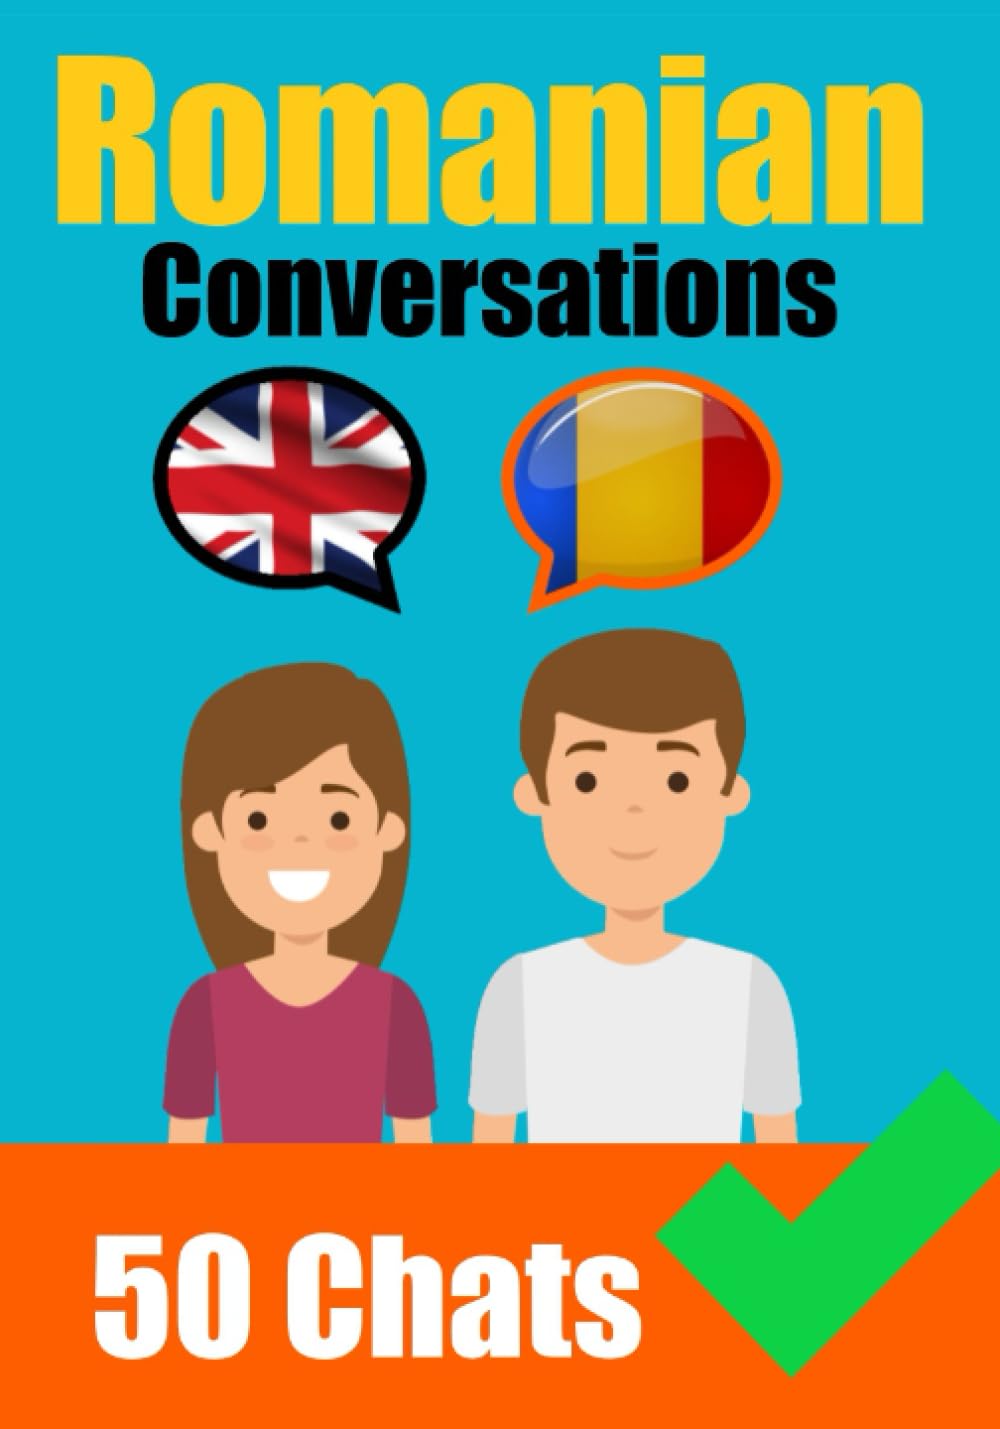 Conversations in Romanian | English and Romanian Conversations Side by Side - Skriuwer.com